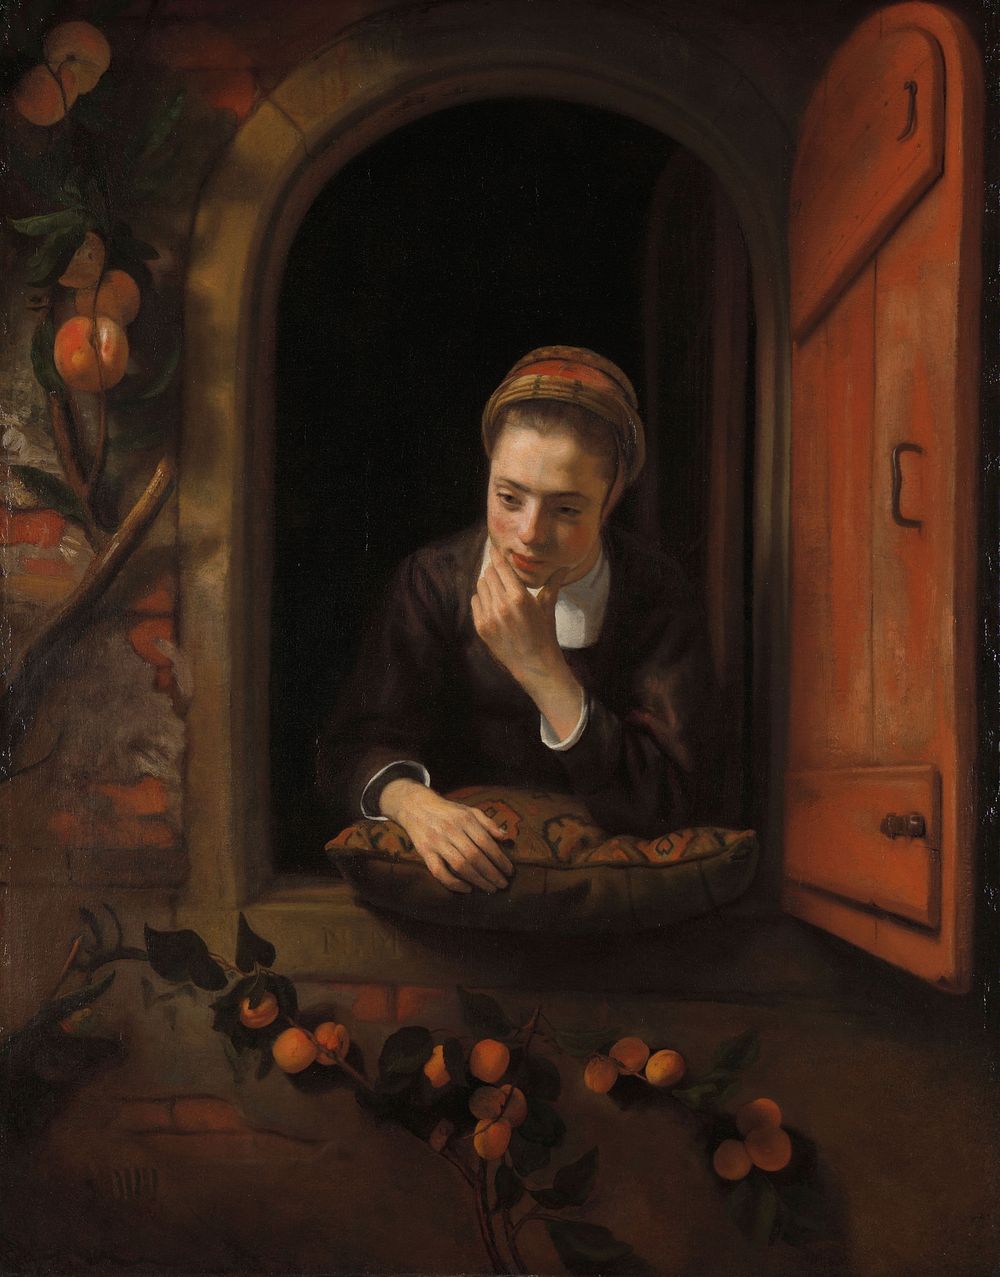 Girl at a Window, known as ‘The Daydreamer’ (1650 - 1660) by Nicolaes Maes